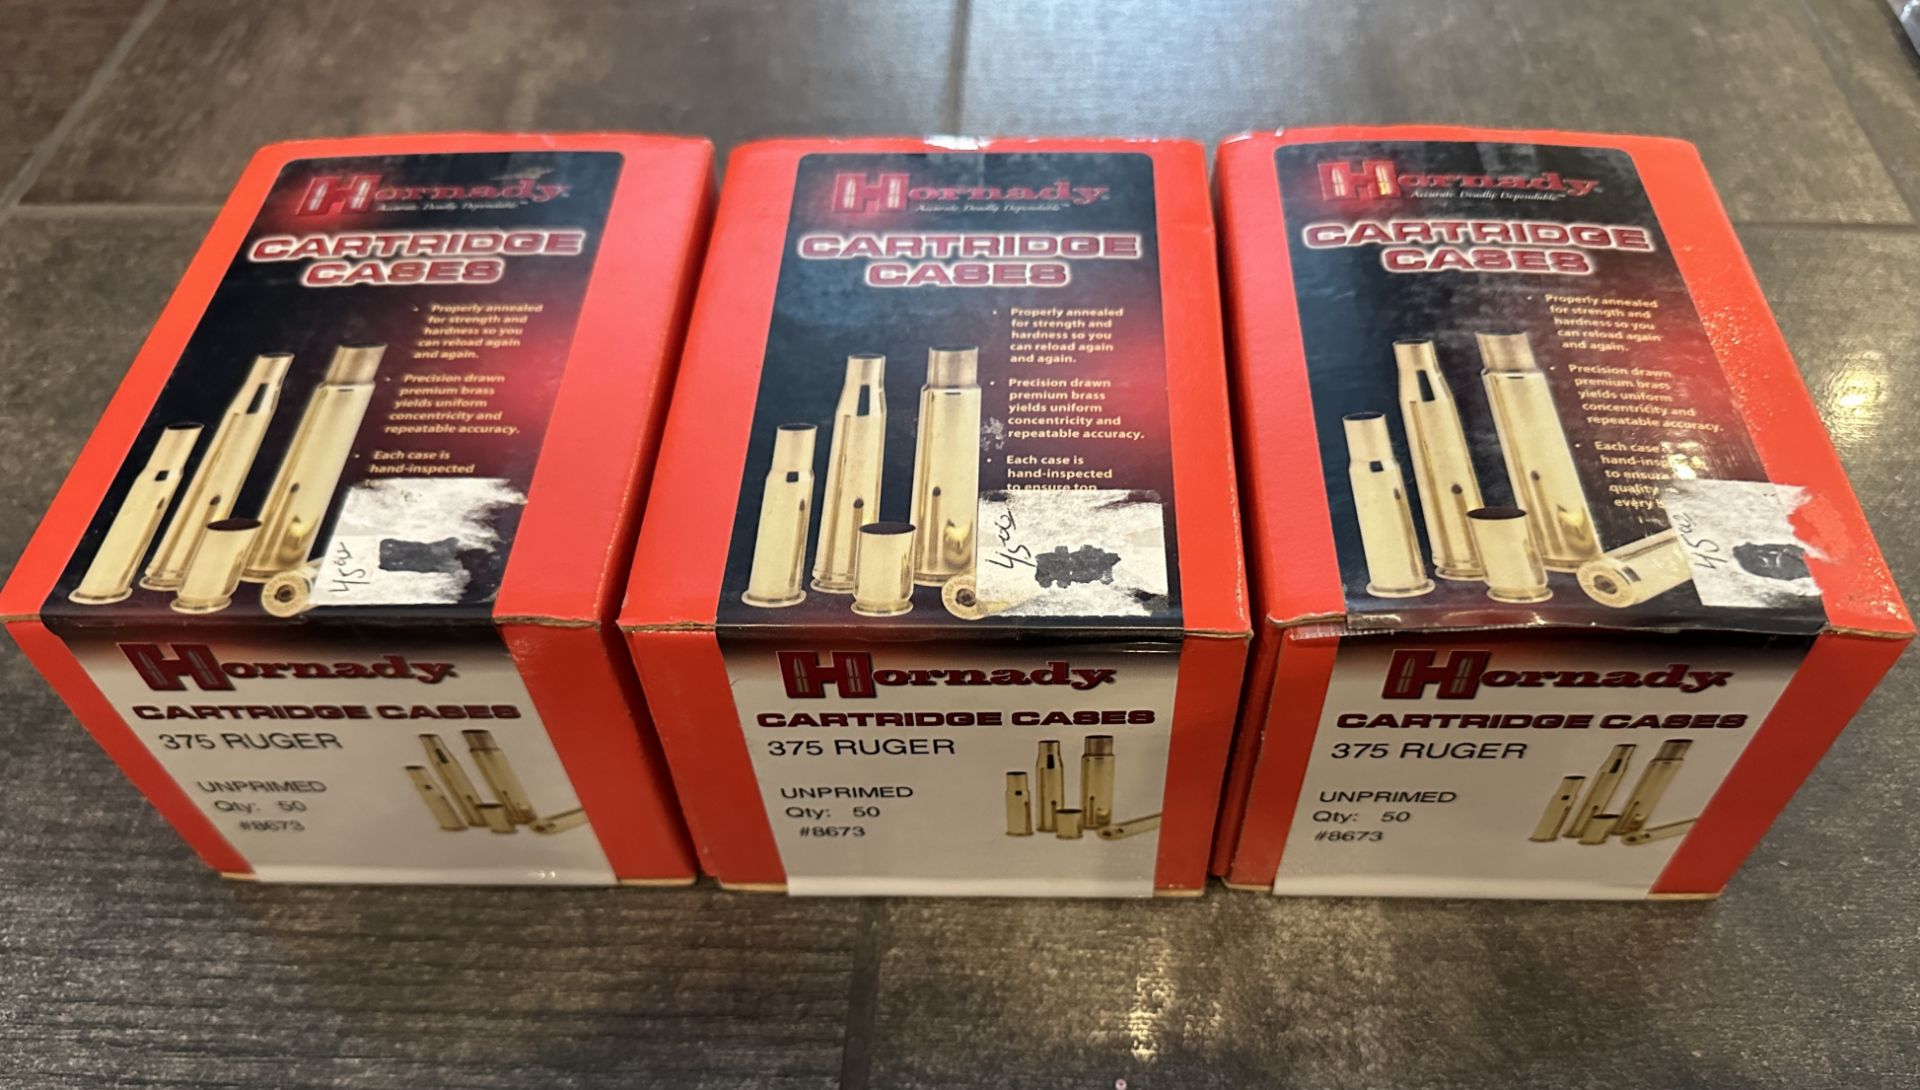 3 BOXES OF 375 RUGER CARTRIDGE CASES - Image 2 of 2